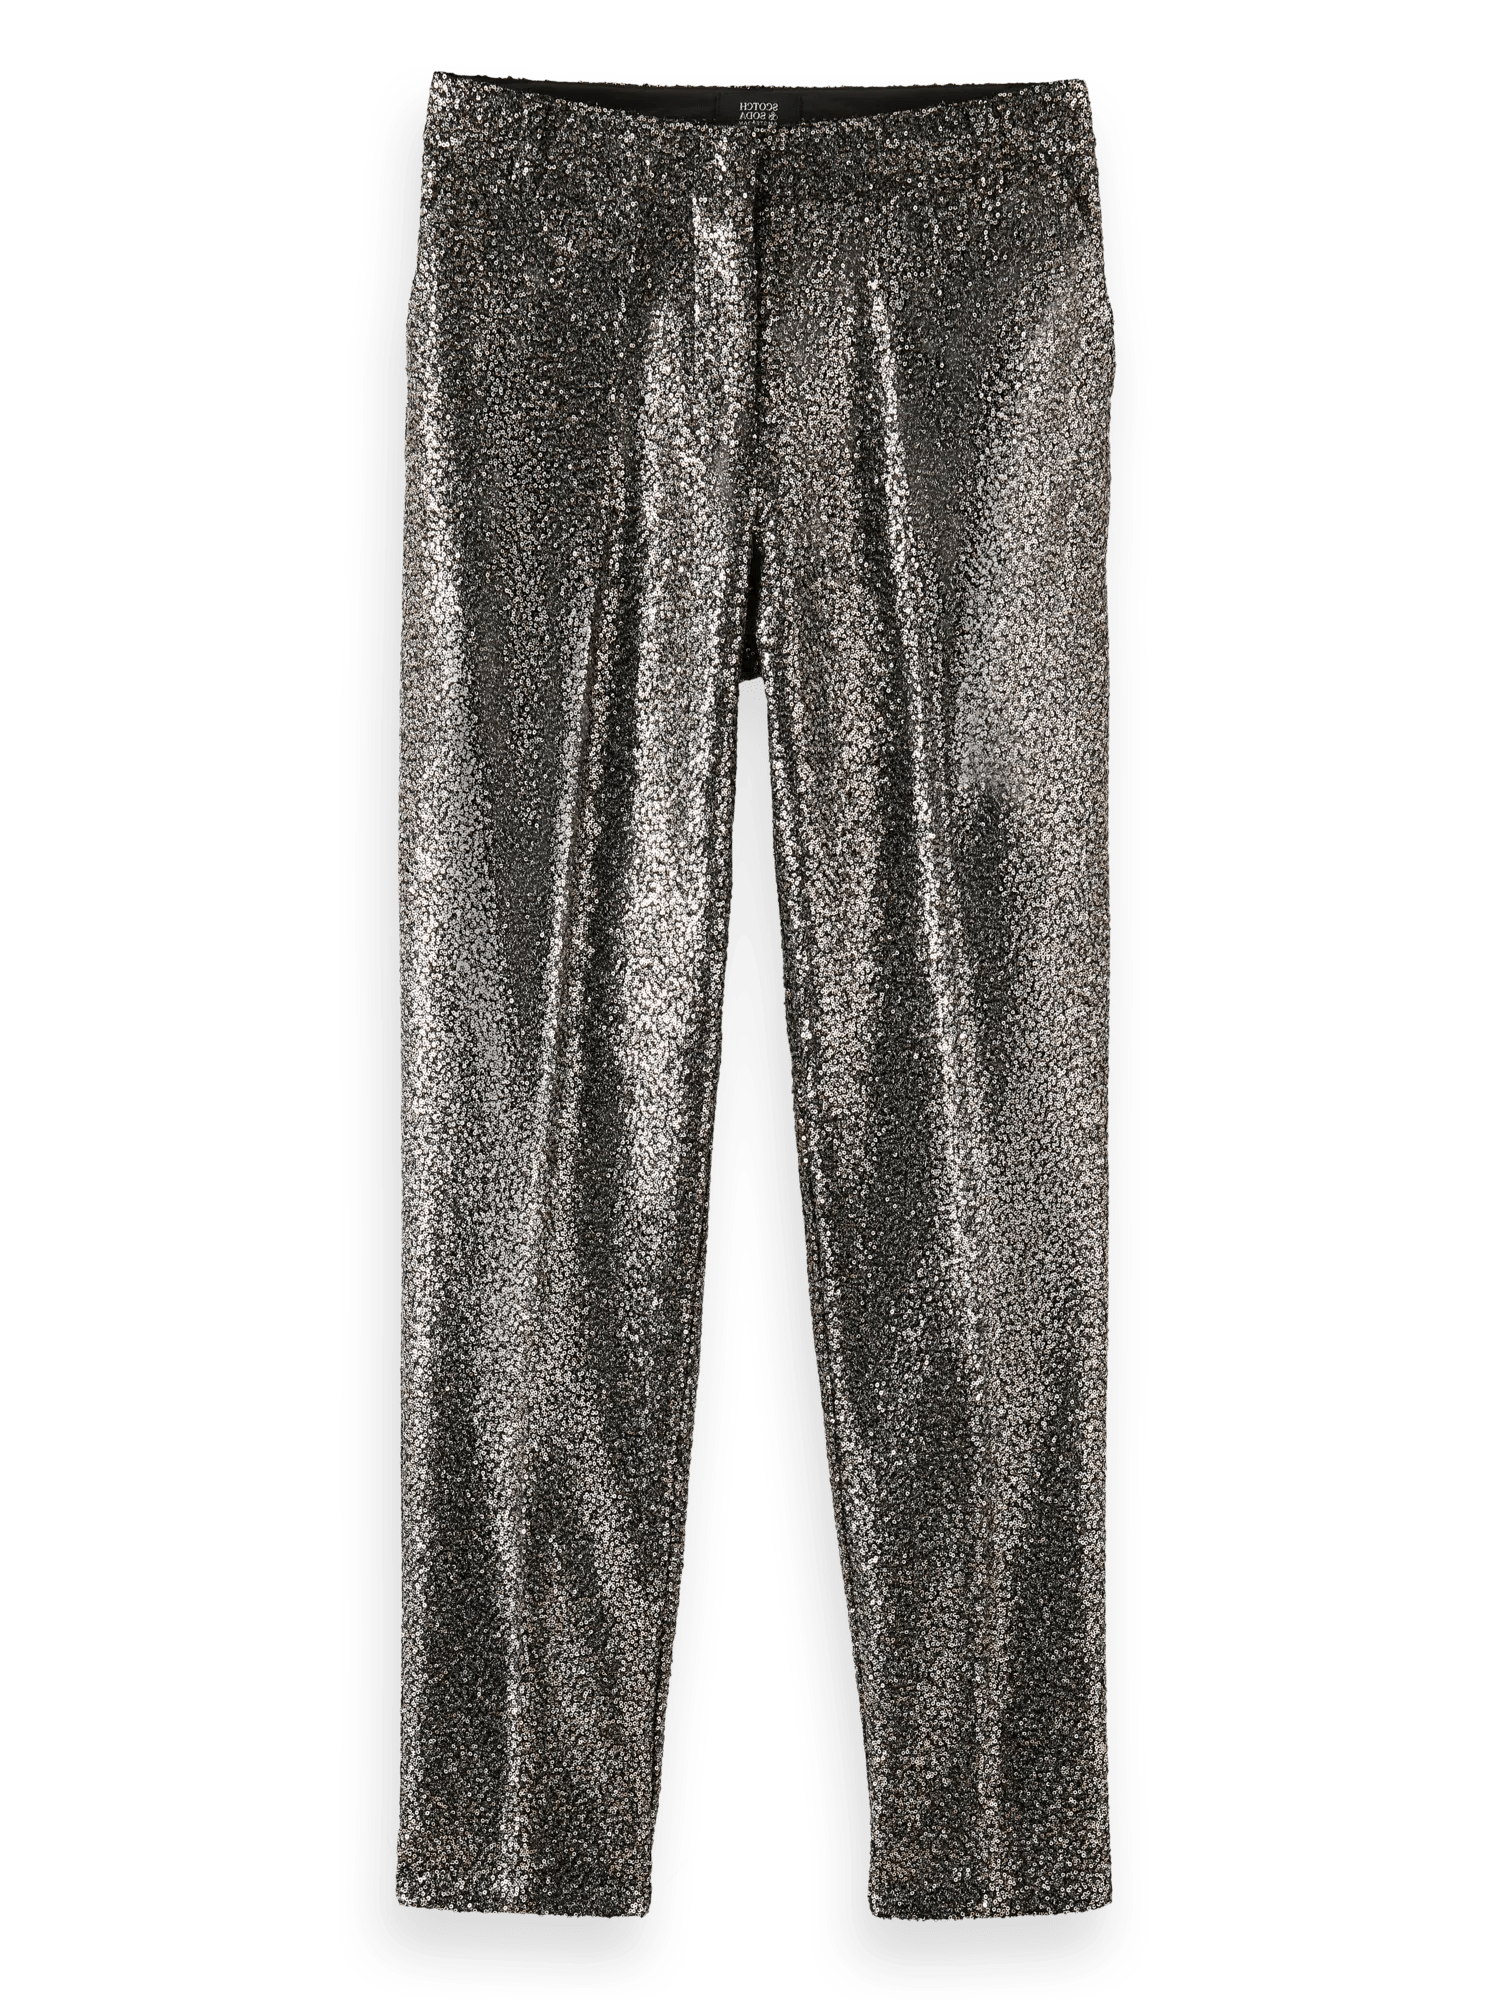 Lowry mid-rise slim fit sequin trousers